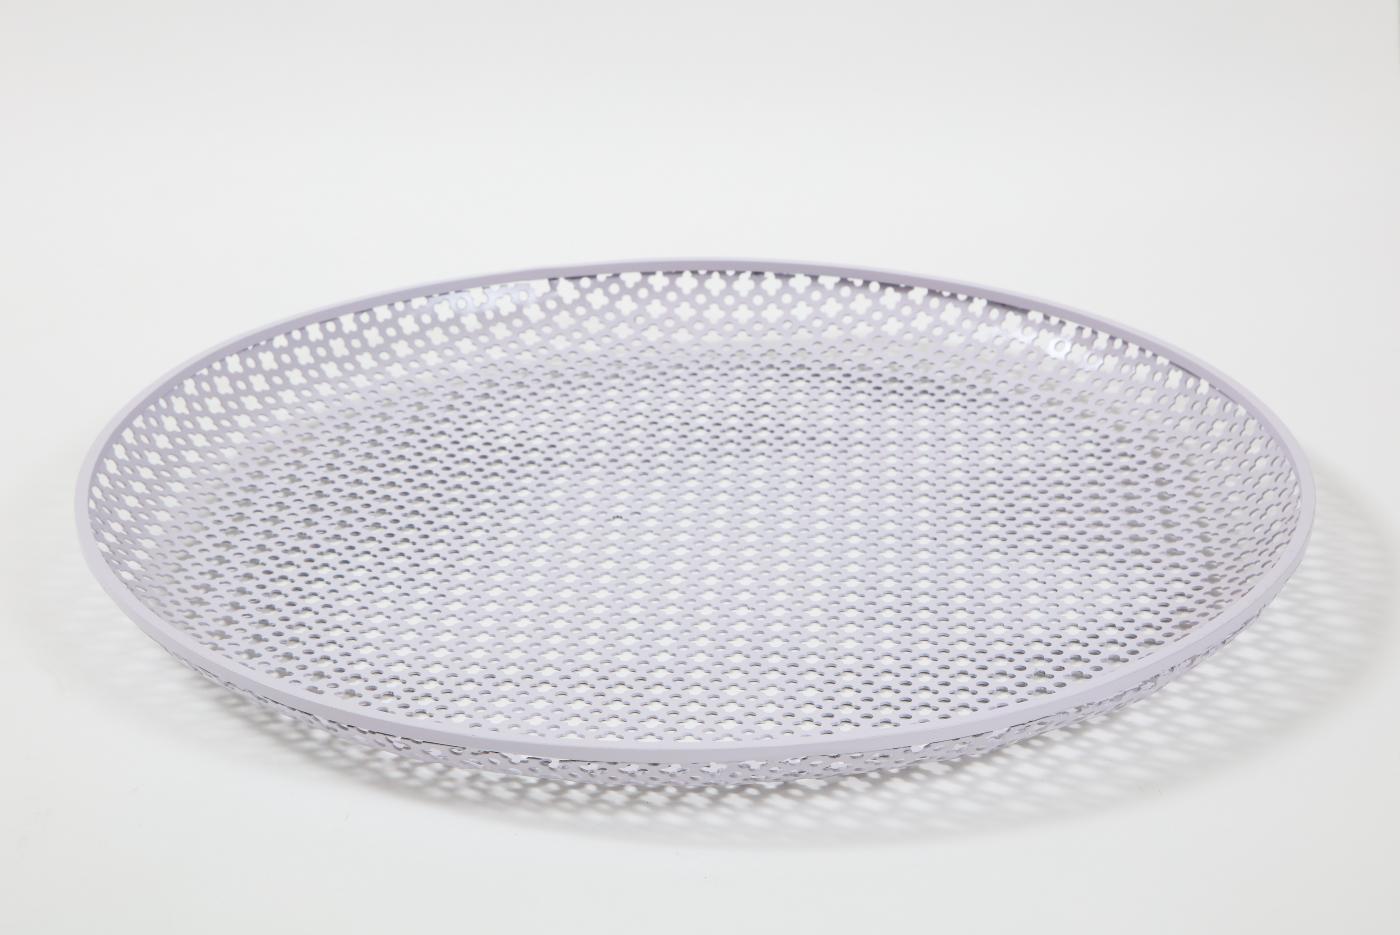 20th Century White Round Perforated Metal Tray by Mathieu Mategot, France, c. 1950 For Sale